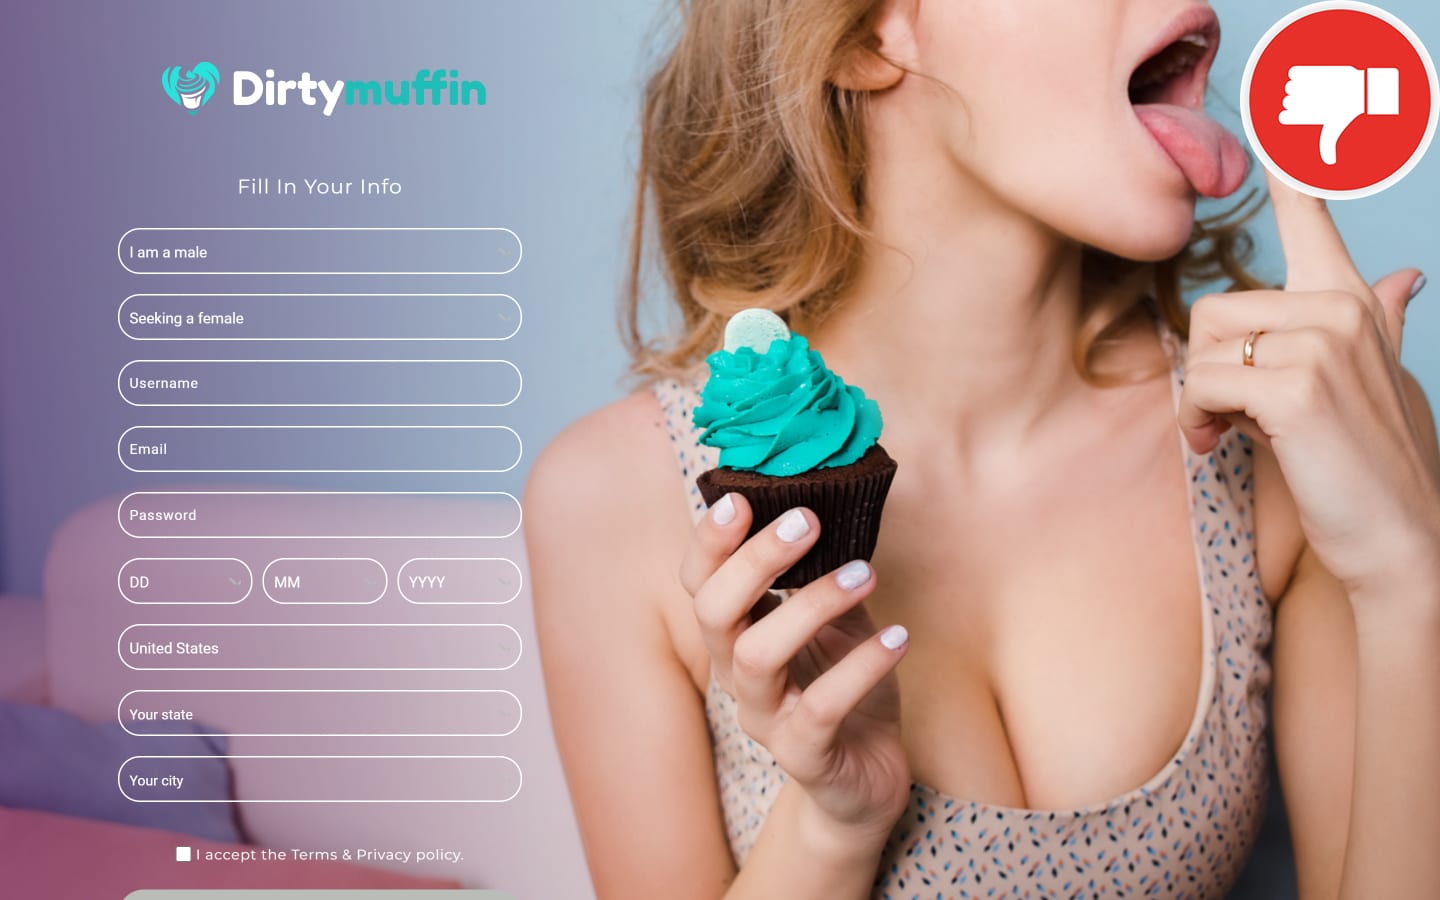 Review DirtyMuffin.net scam experience